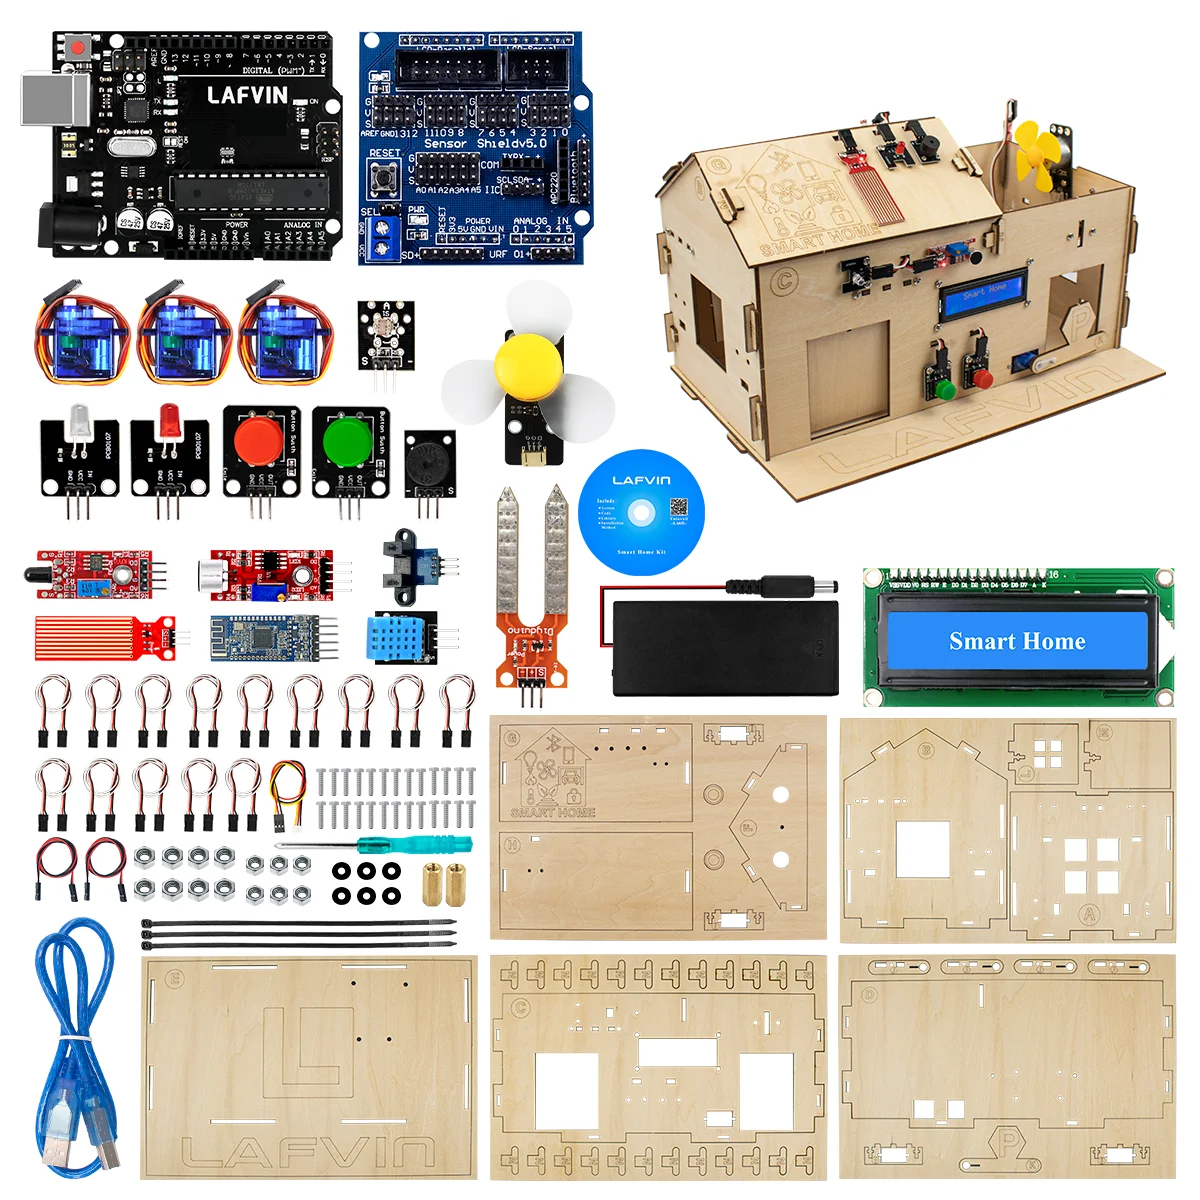 LAFVIN Smart Home Kit Learning Programming Kits with Uno R3 Board for Arduino UNO DIY STEM